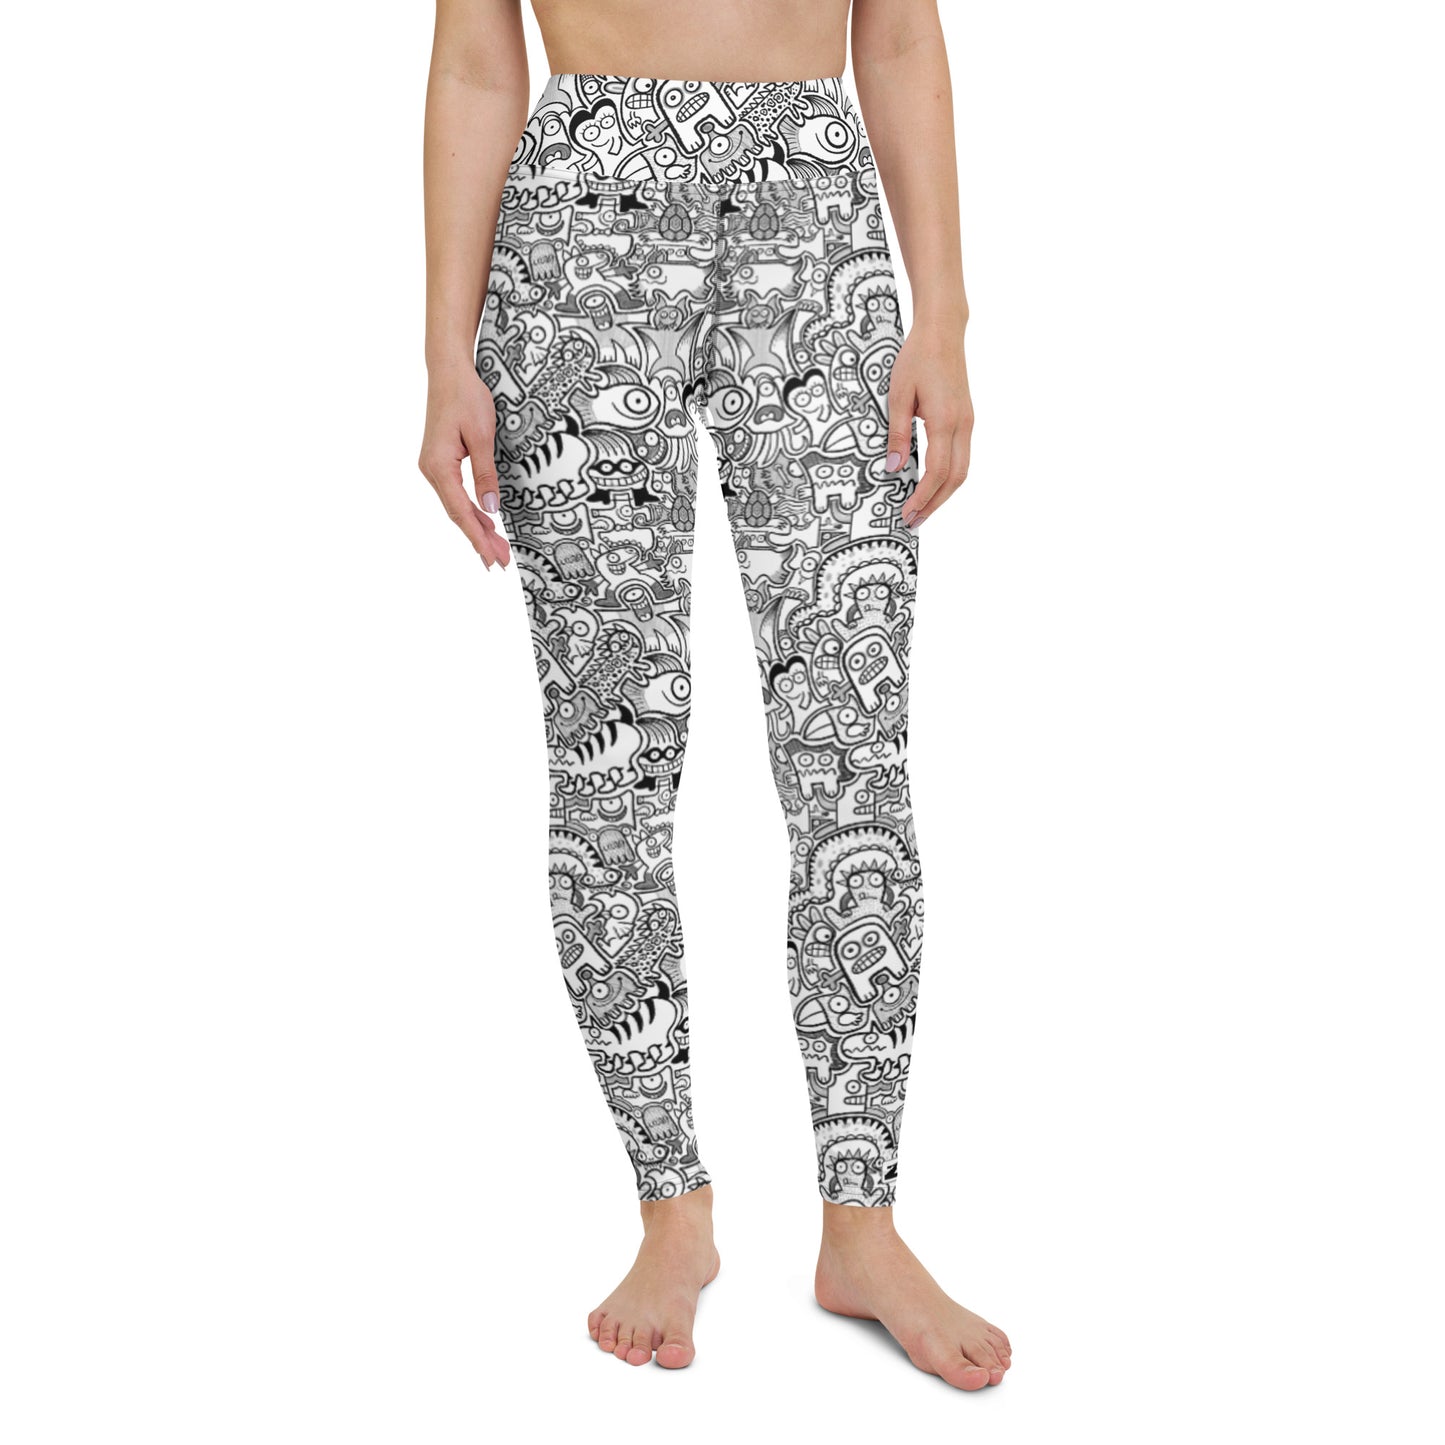 Fill your world with cool doodles Yoga Leggings. Front view